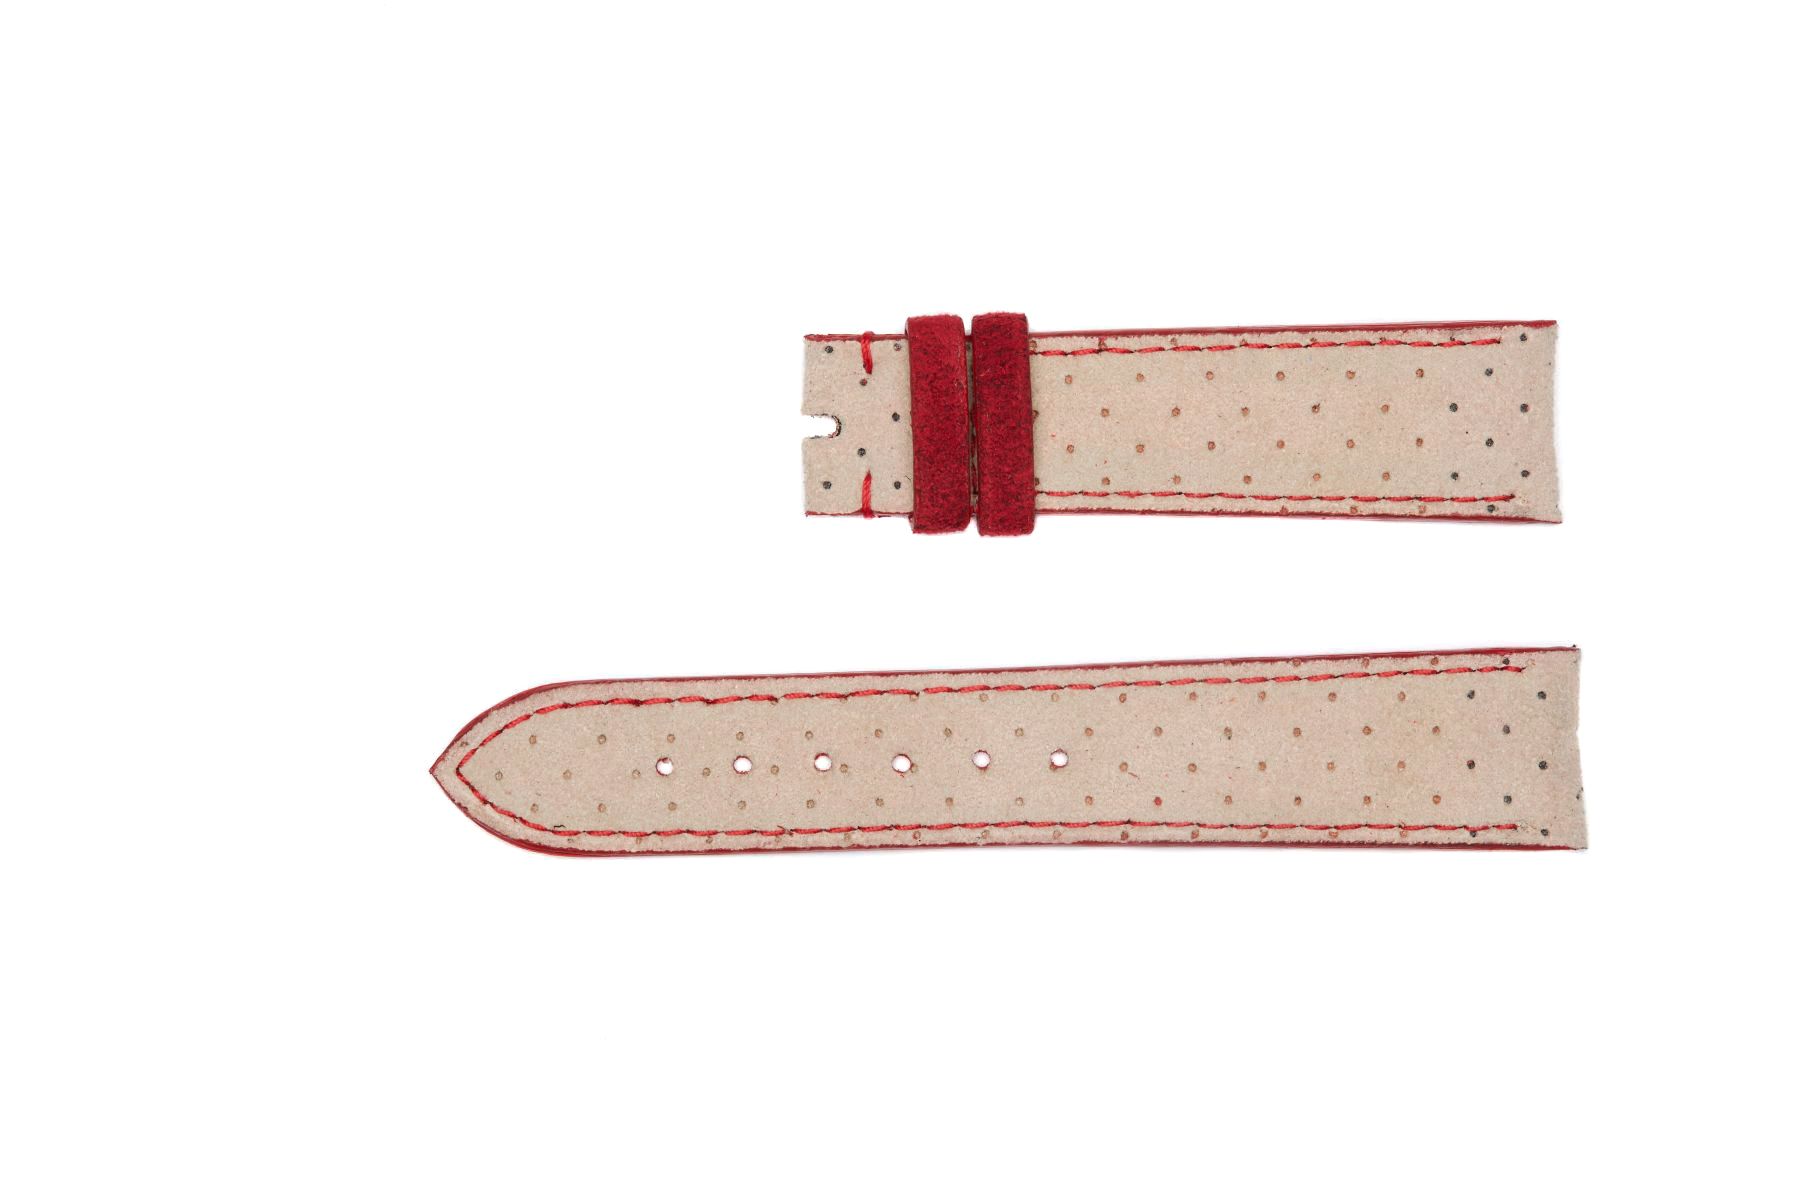 Beige Perforated Alcantara Strap 16mm, 18mm, 19mm, 20mm, 21mm, 22mm, 24mm General style